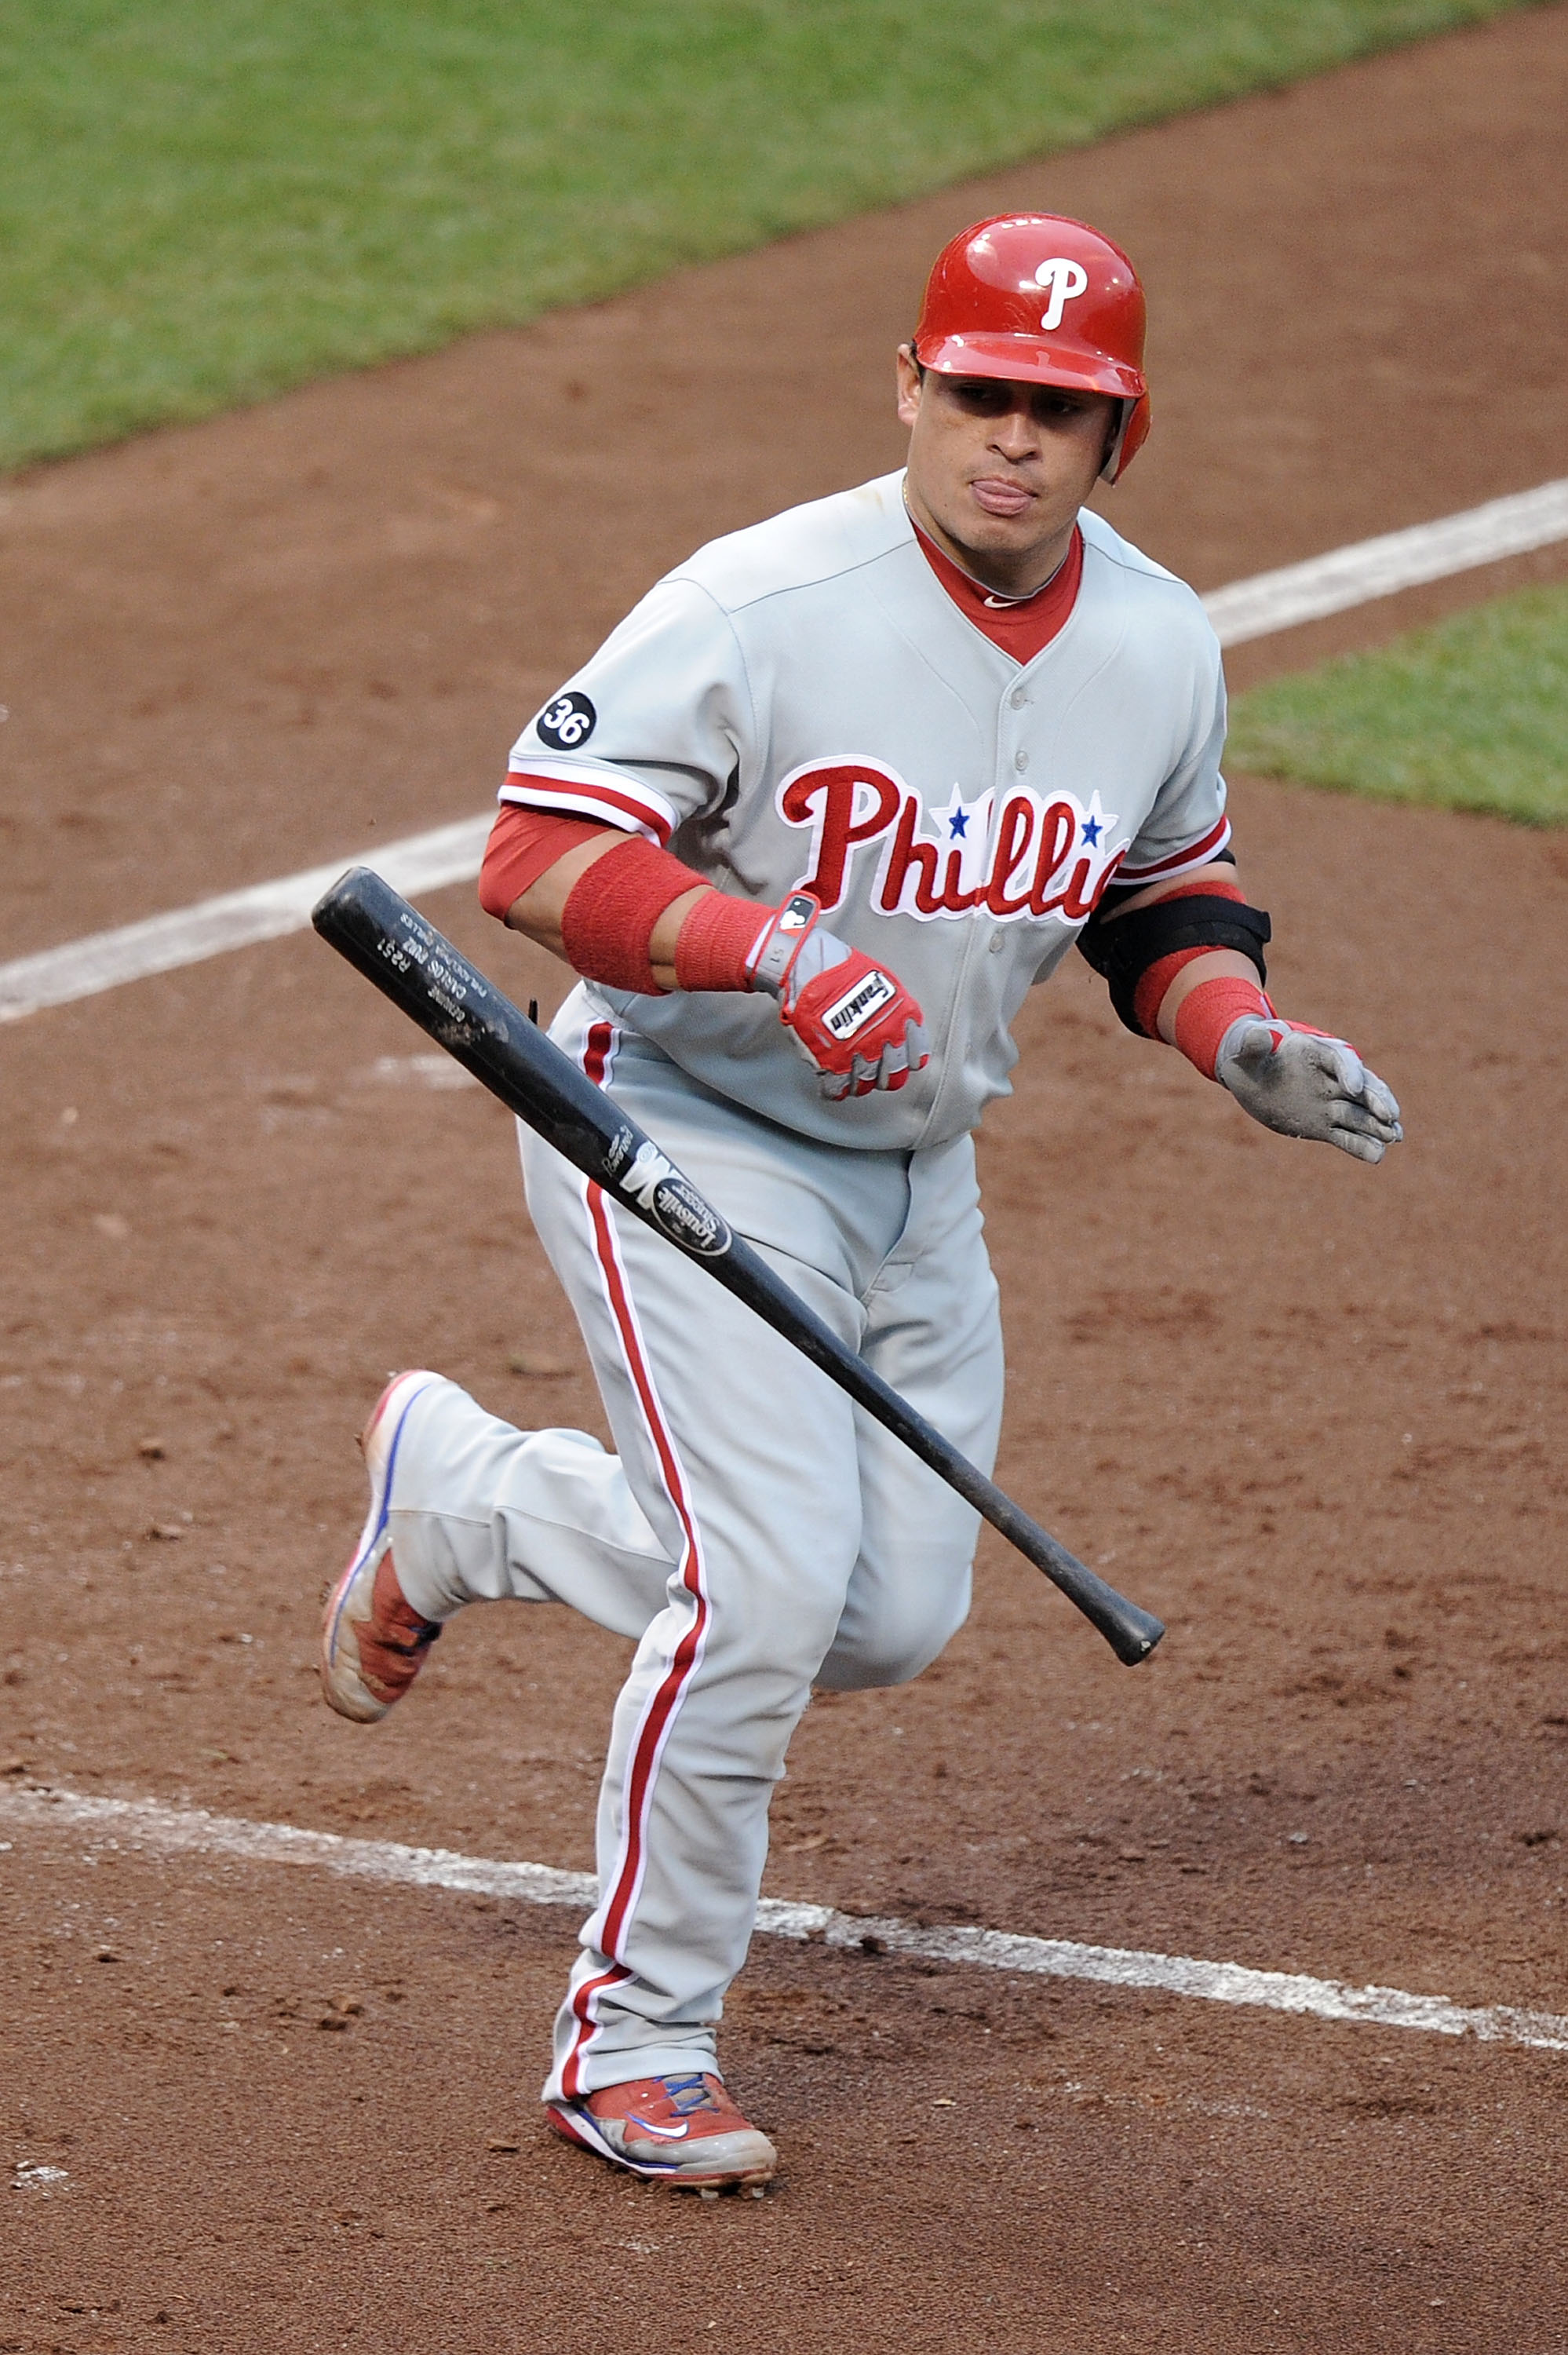 Best Shane Victorino Phillies Moments, The Flyin' Hawaiian spent some  memorable years on the Phillies., By Philadelphia Phillies Highlights